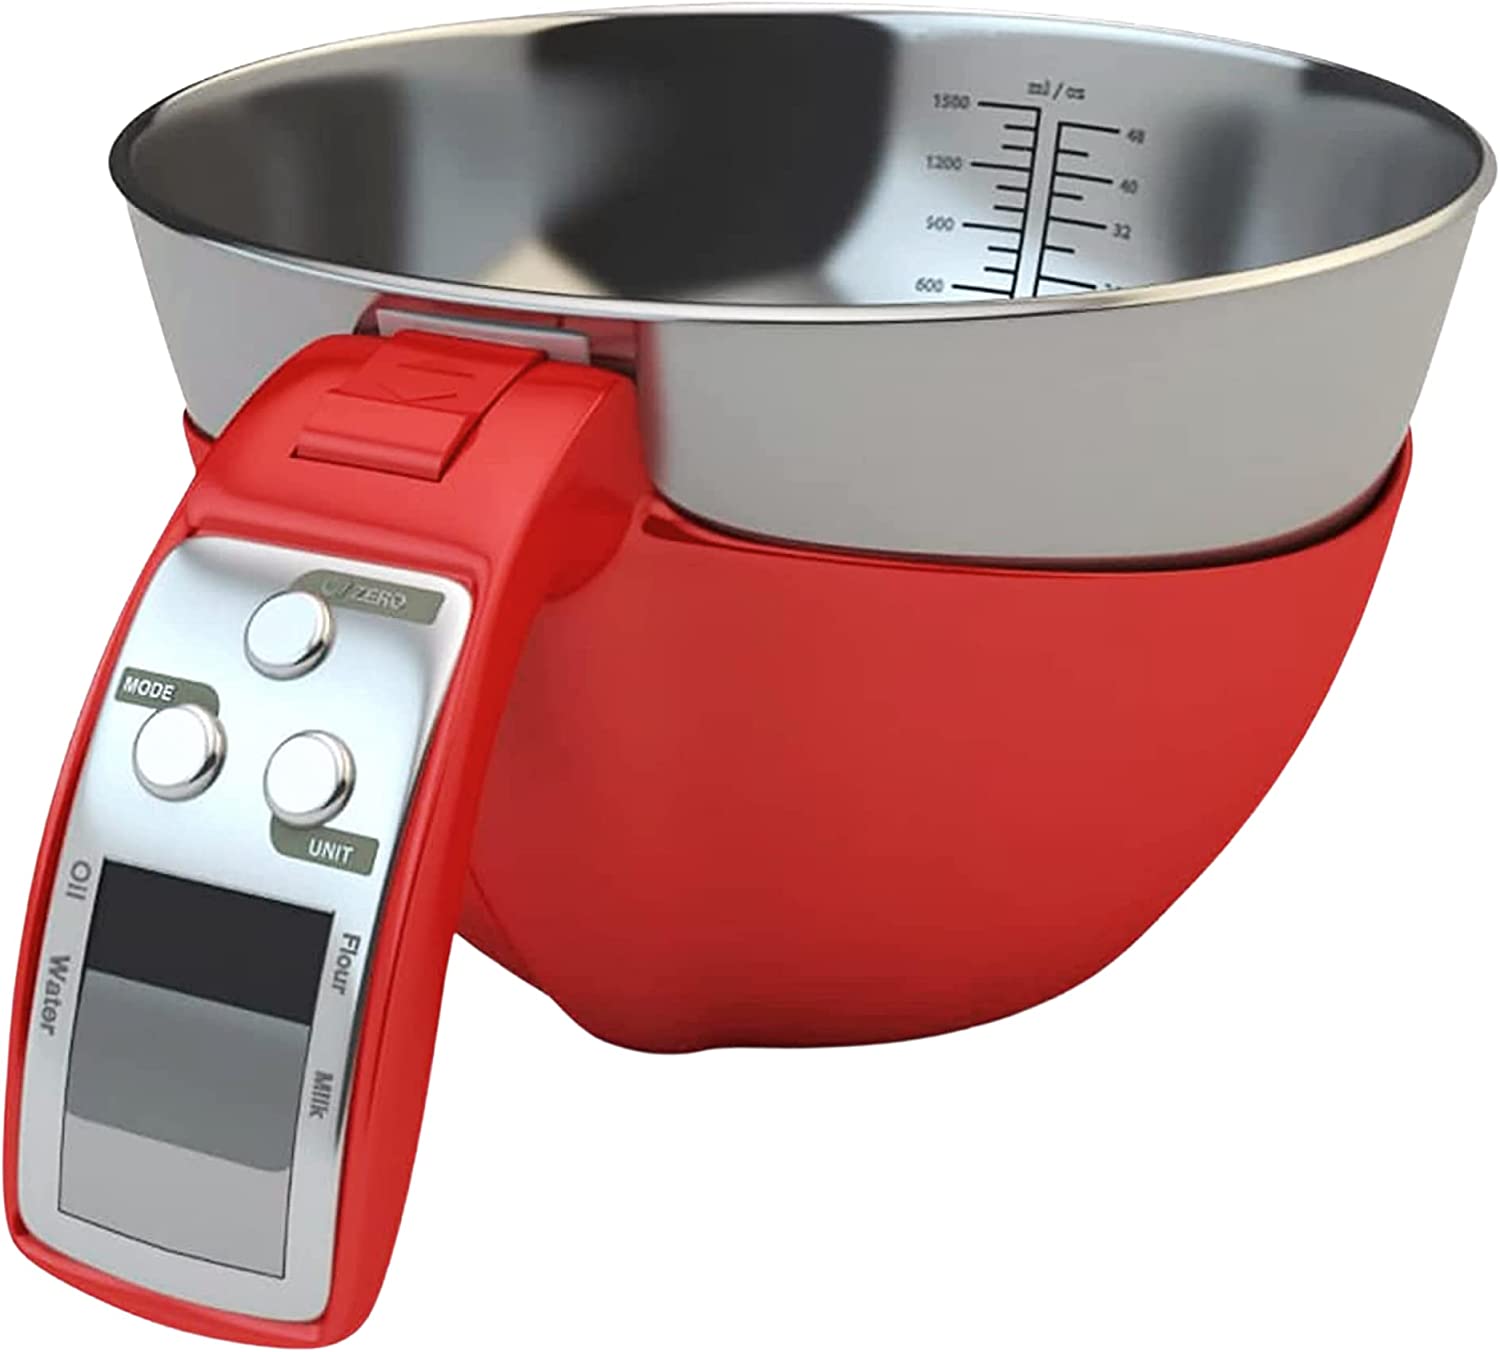 Fradel Digital Kitchen Food Scale with Bowl (Removable) and